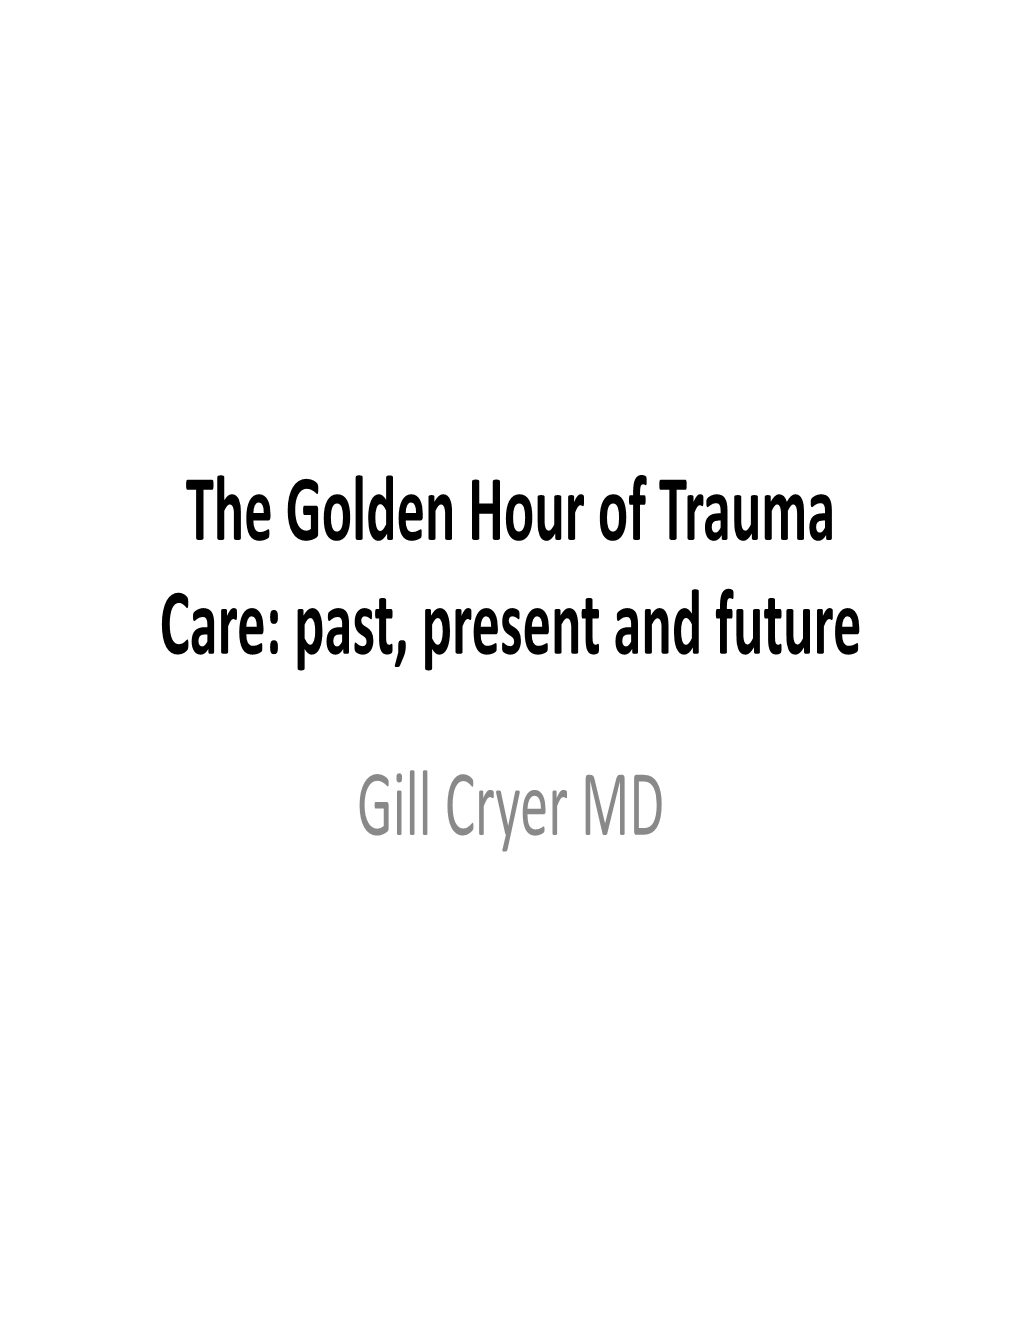 The Golden Hour of Trauma Care: Past, Present and Future Gill Cryer MD